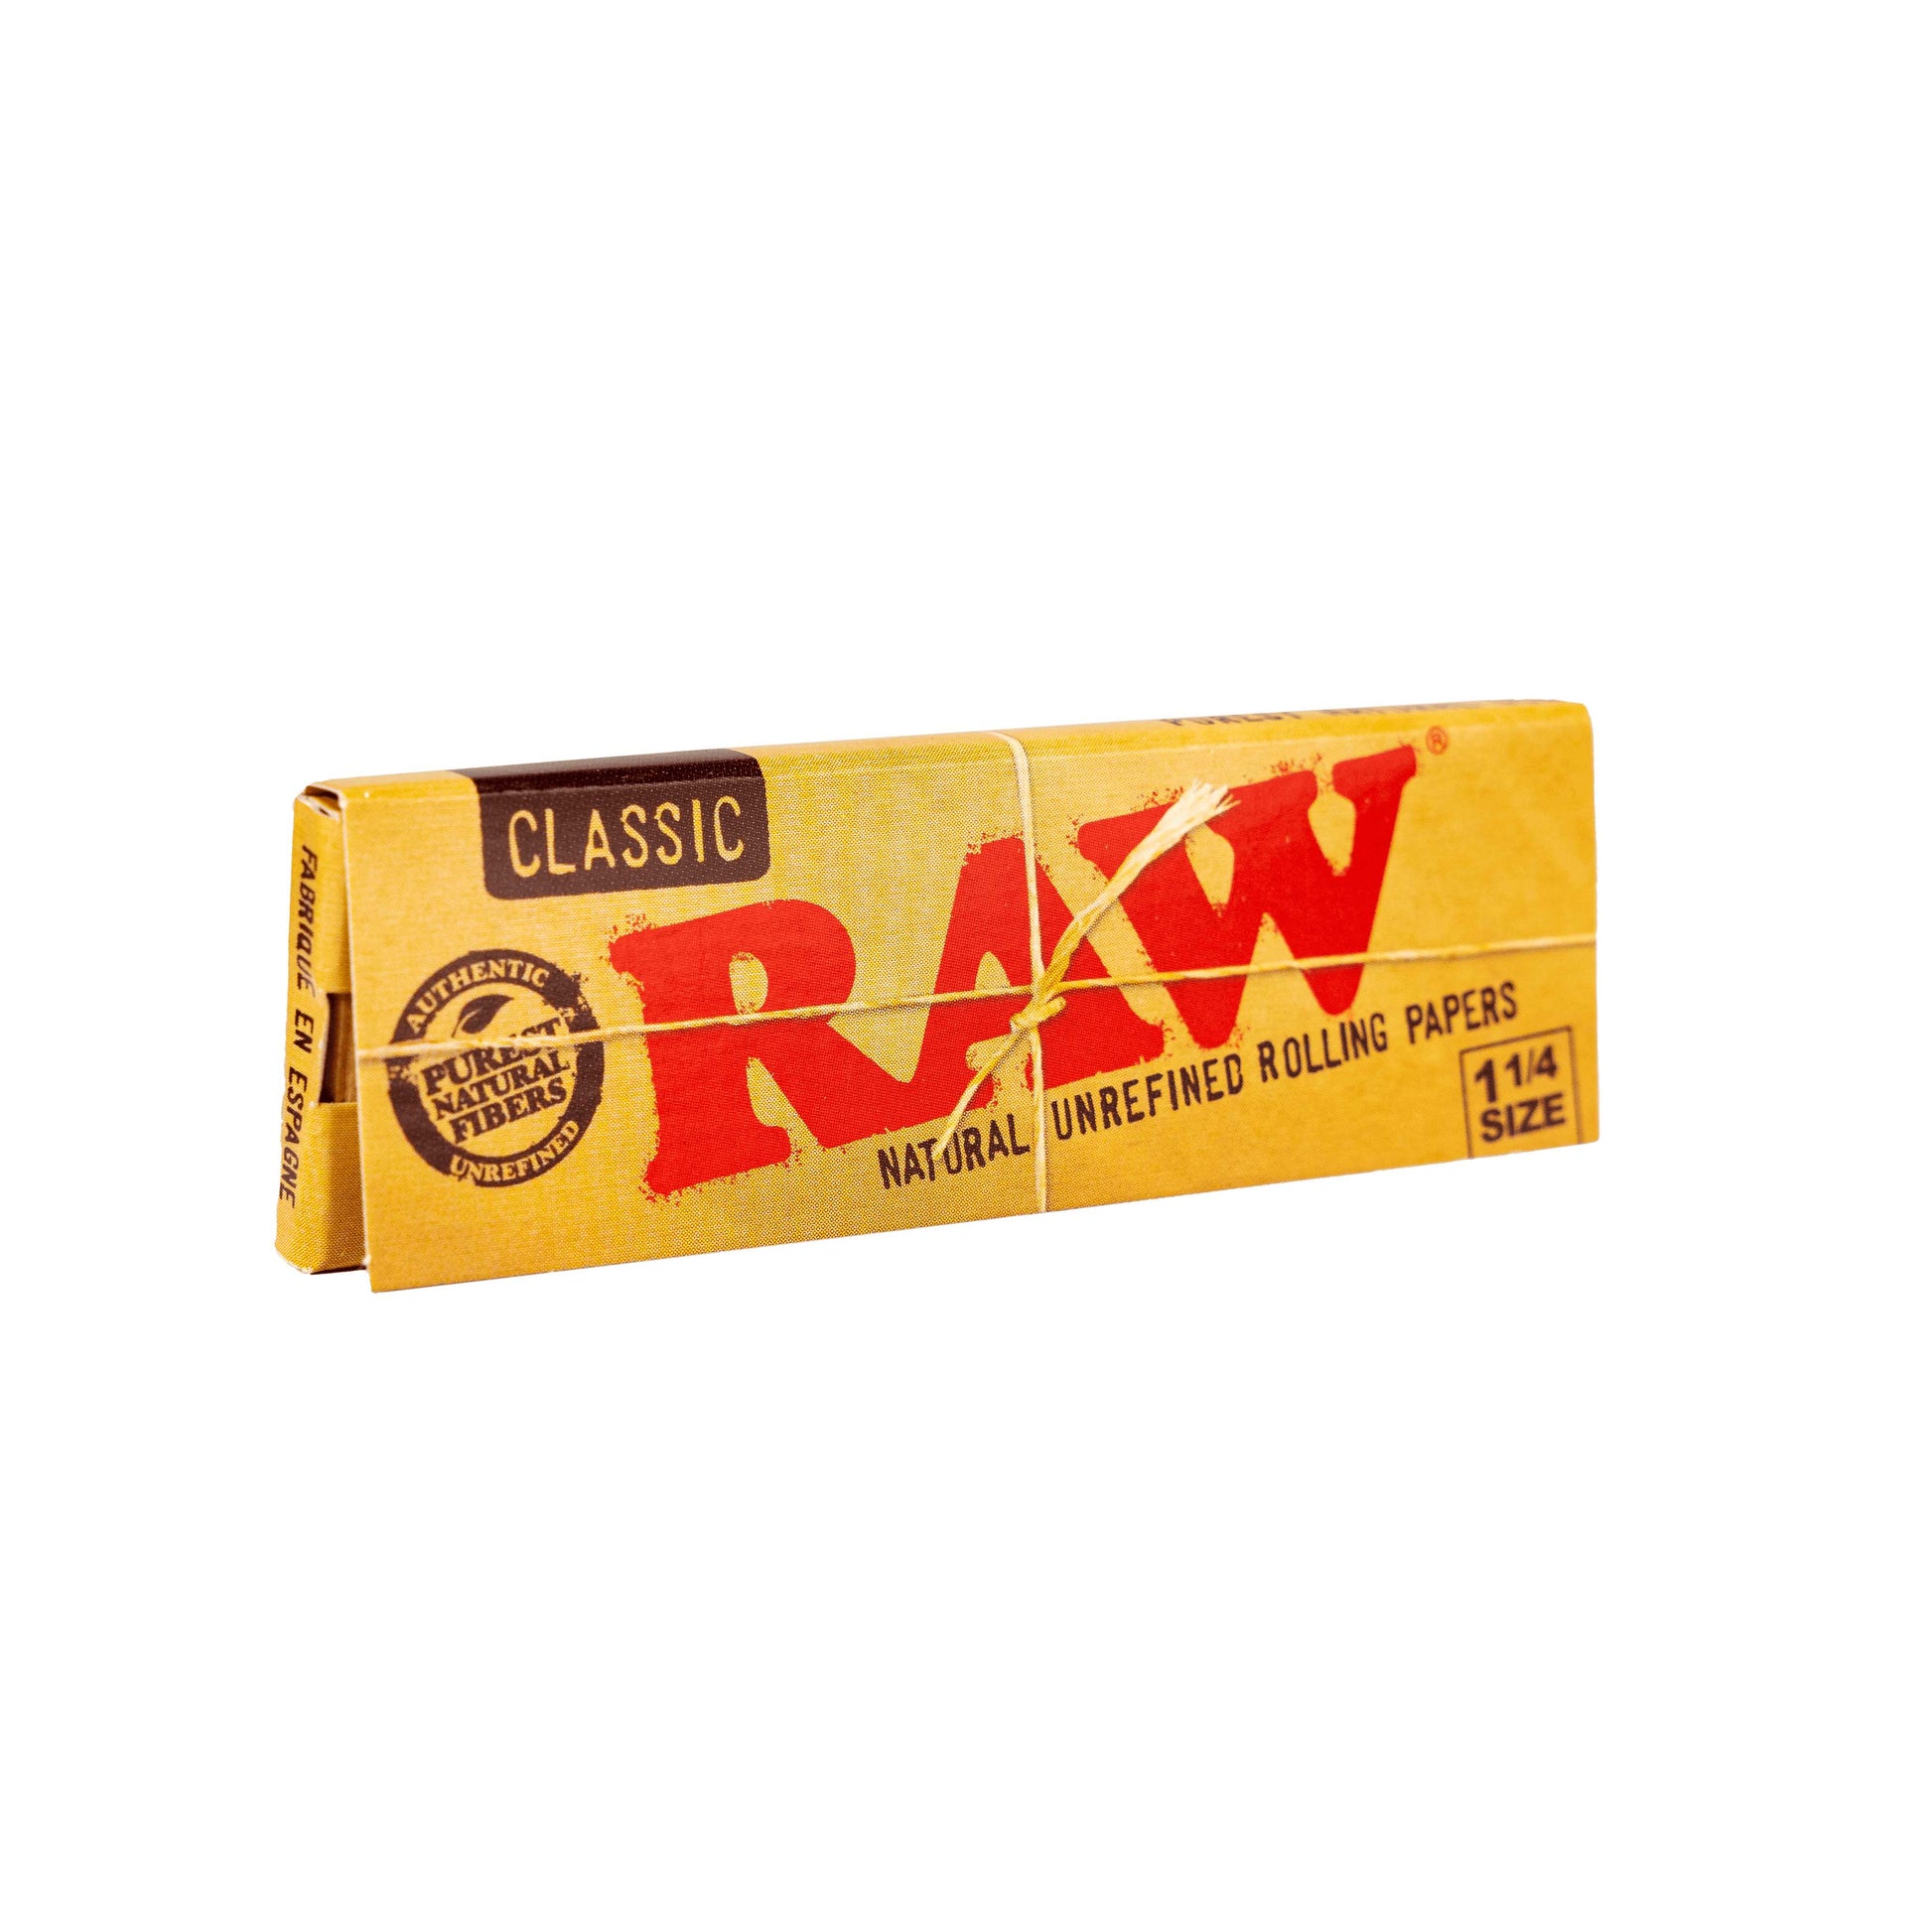 RAW Rolling Papers - 1 1/4 - Papers - Classic- Rolling Papers - RAW - Cali Tobacconist